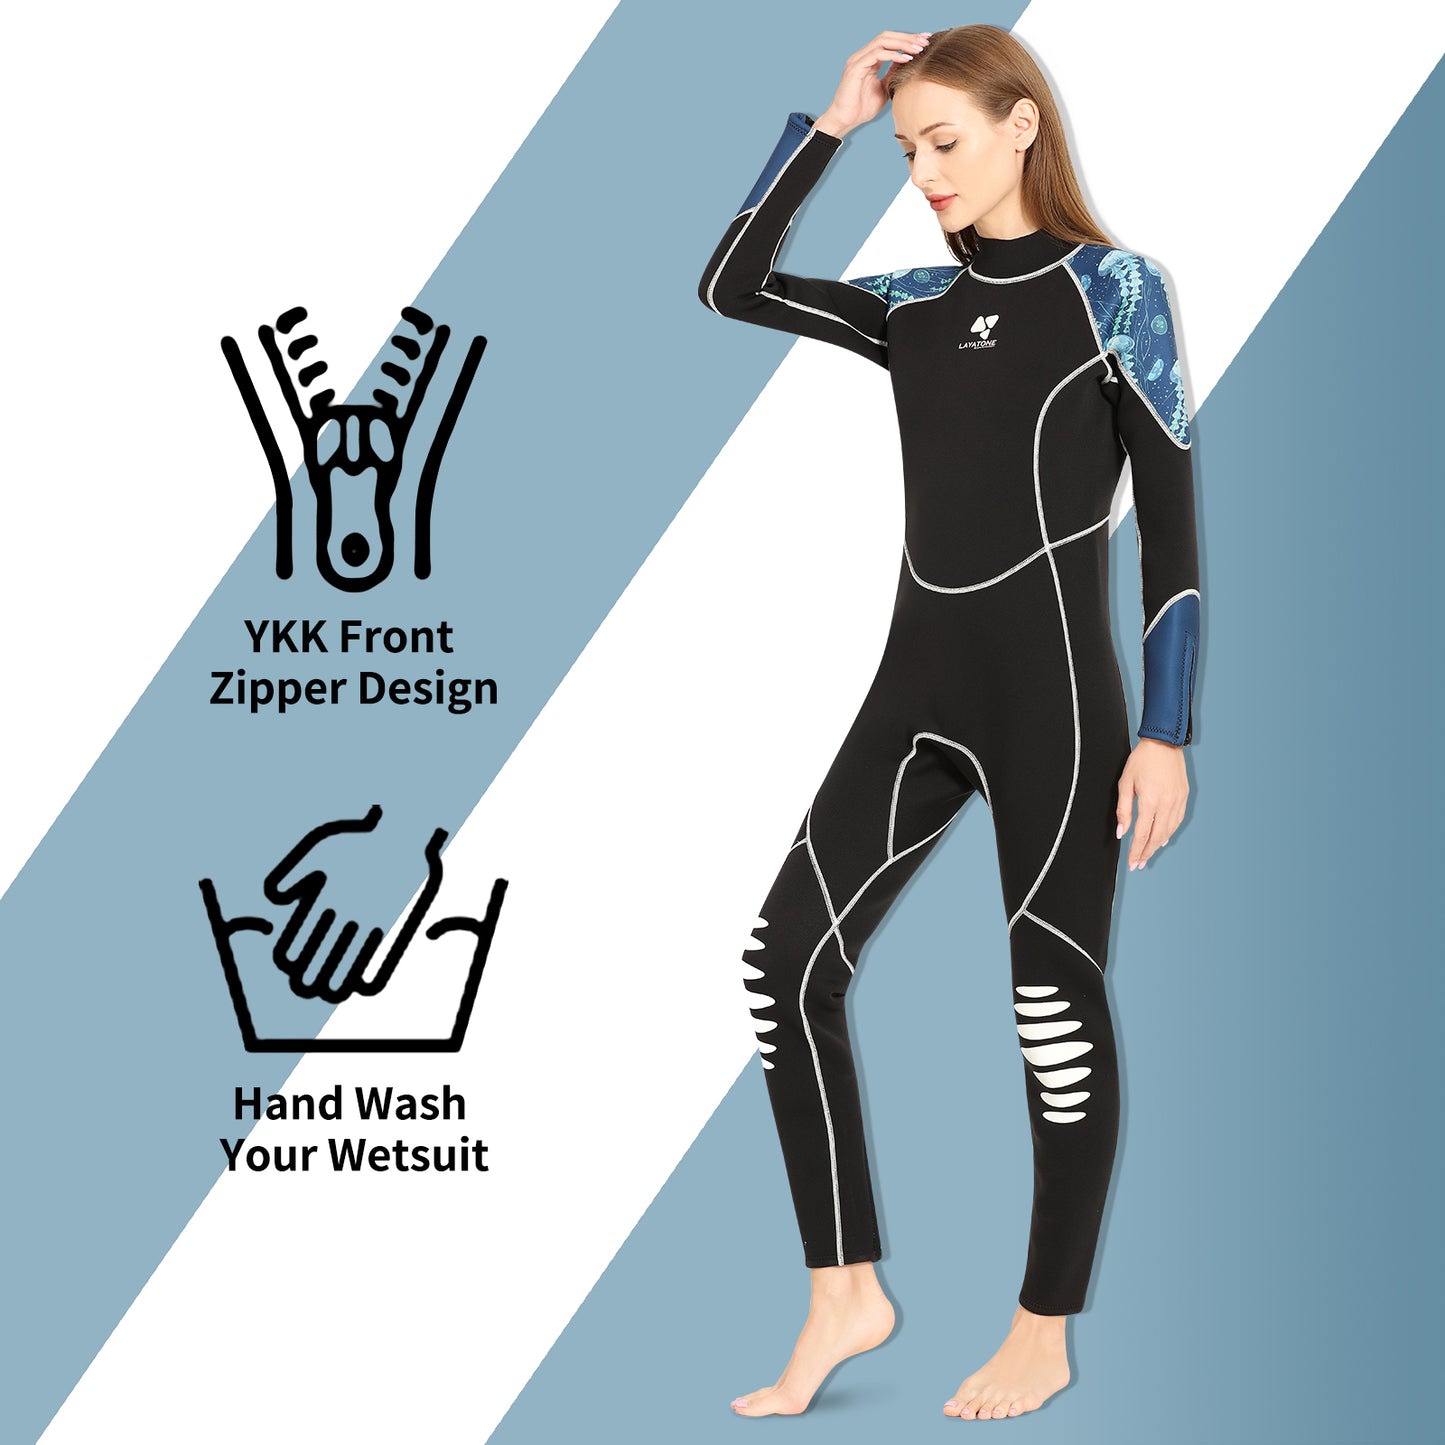 LayaTone Wetsuit Women Full Body 3mm Neoprene Diving Suit with Back Zip, Wetsuits for Women in Cold Water Swimming Diving Snorkeling Kayaking